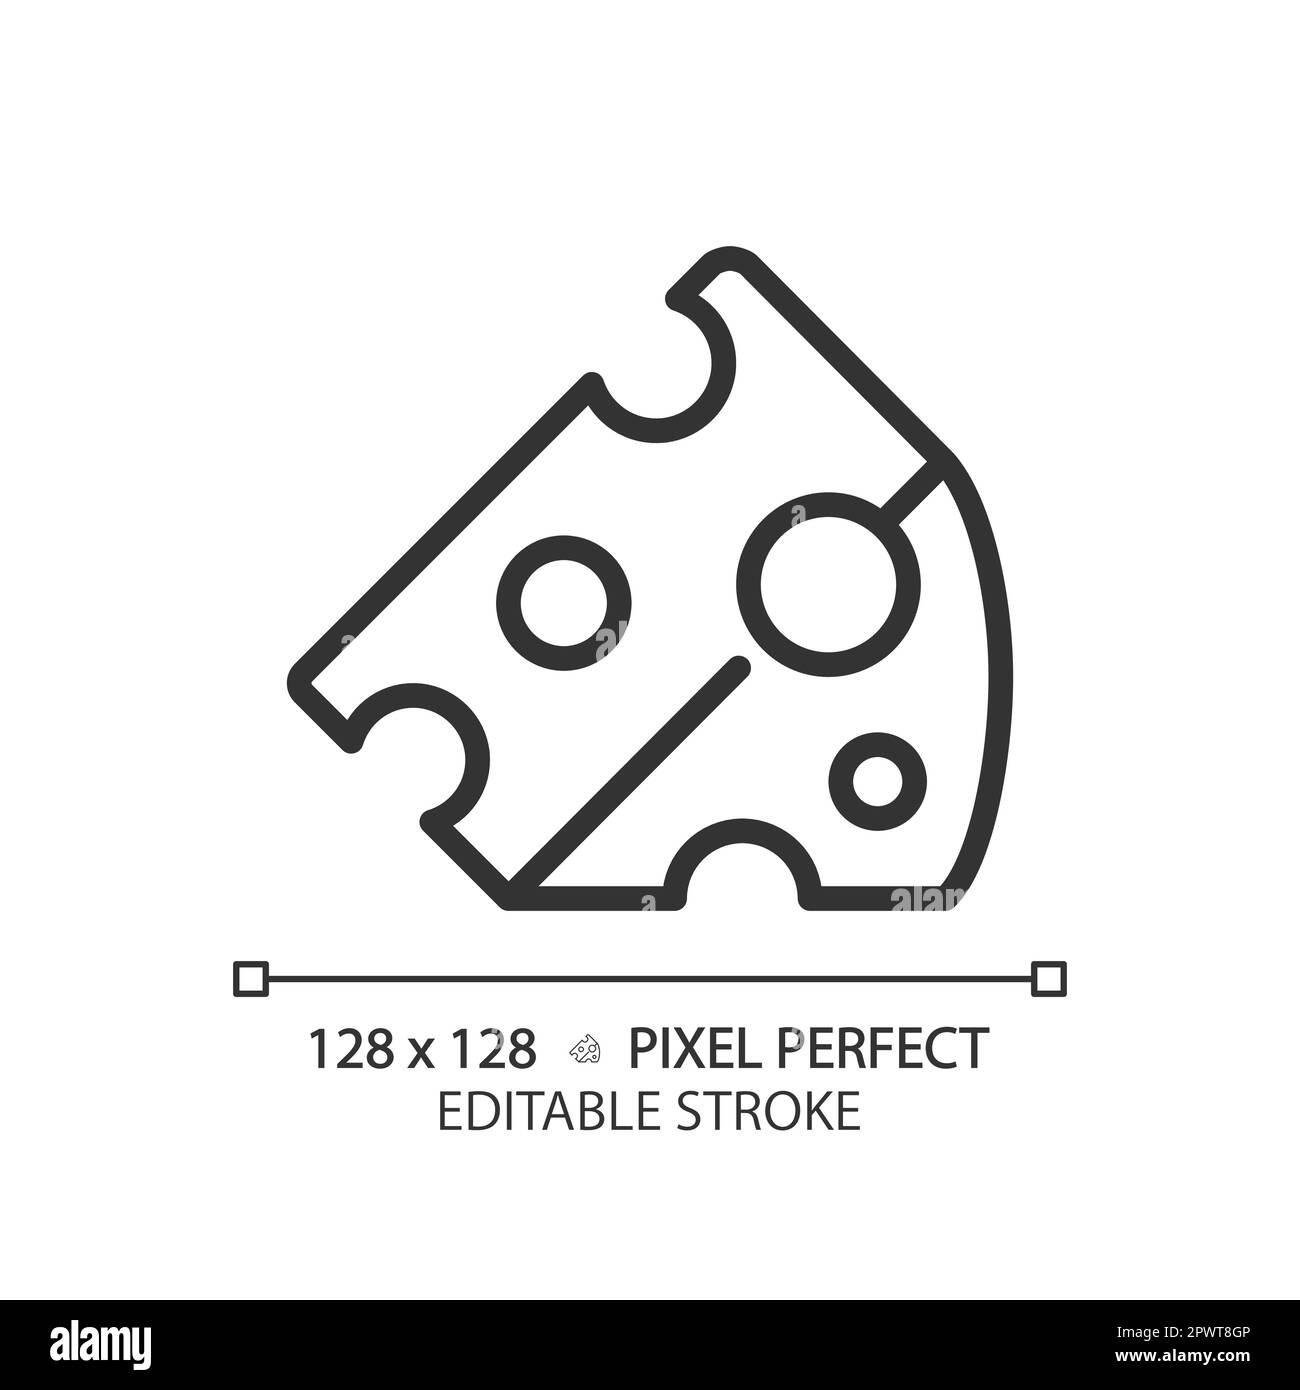 Cheese pixel perfect linear icon Stock Vector